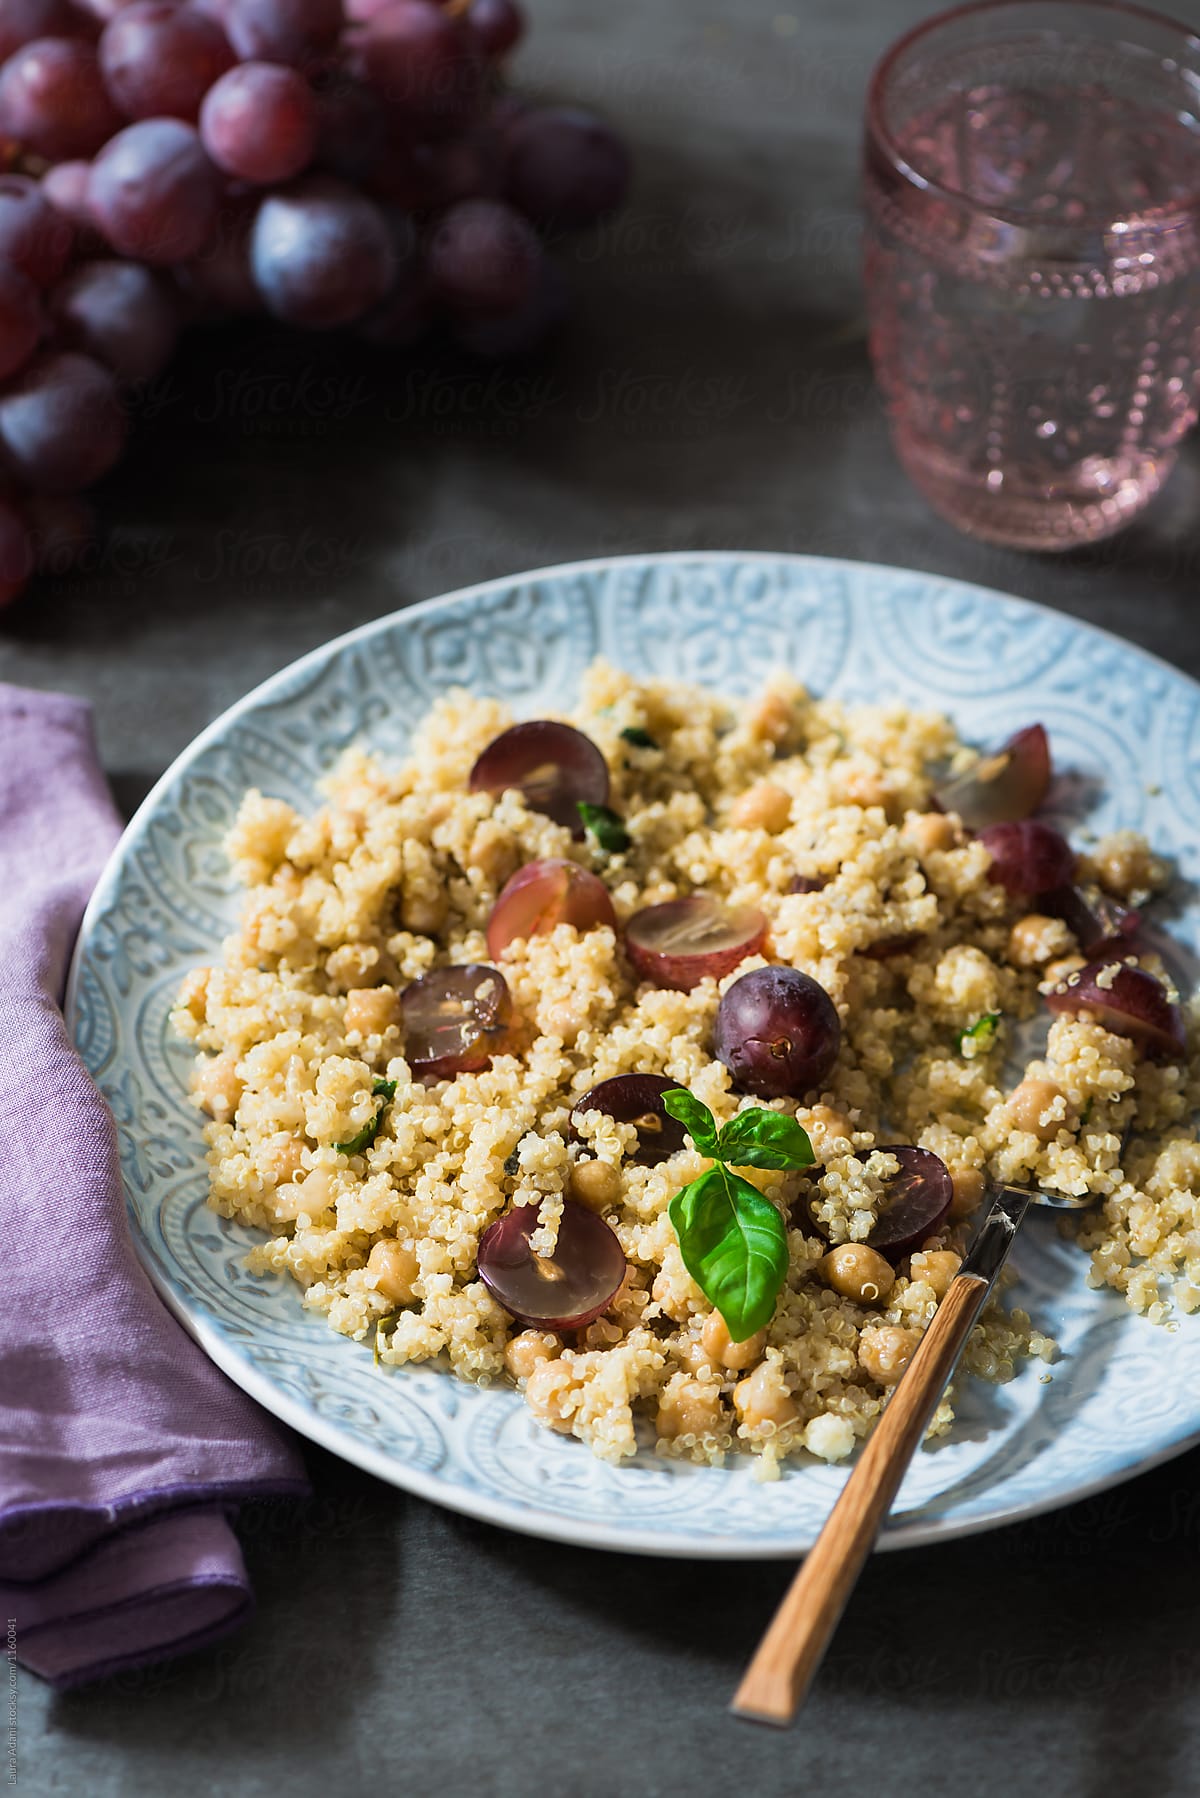 Quinoa salad with chickpeas and grapes